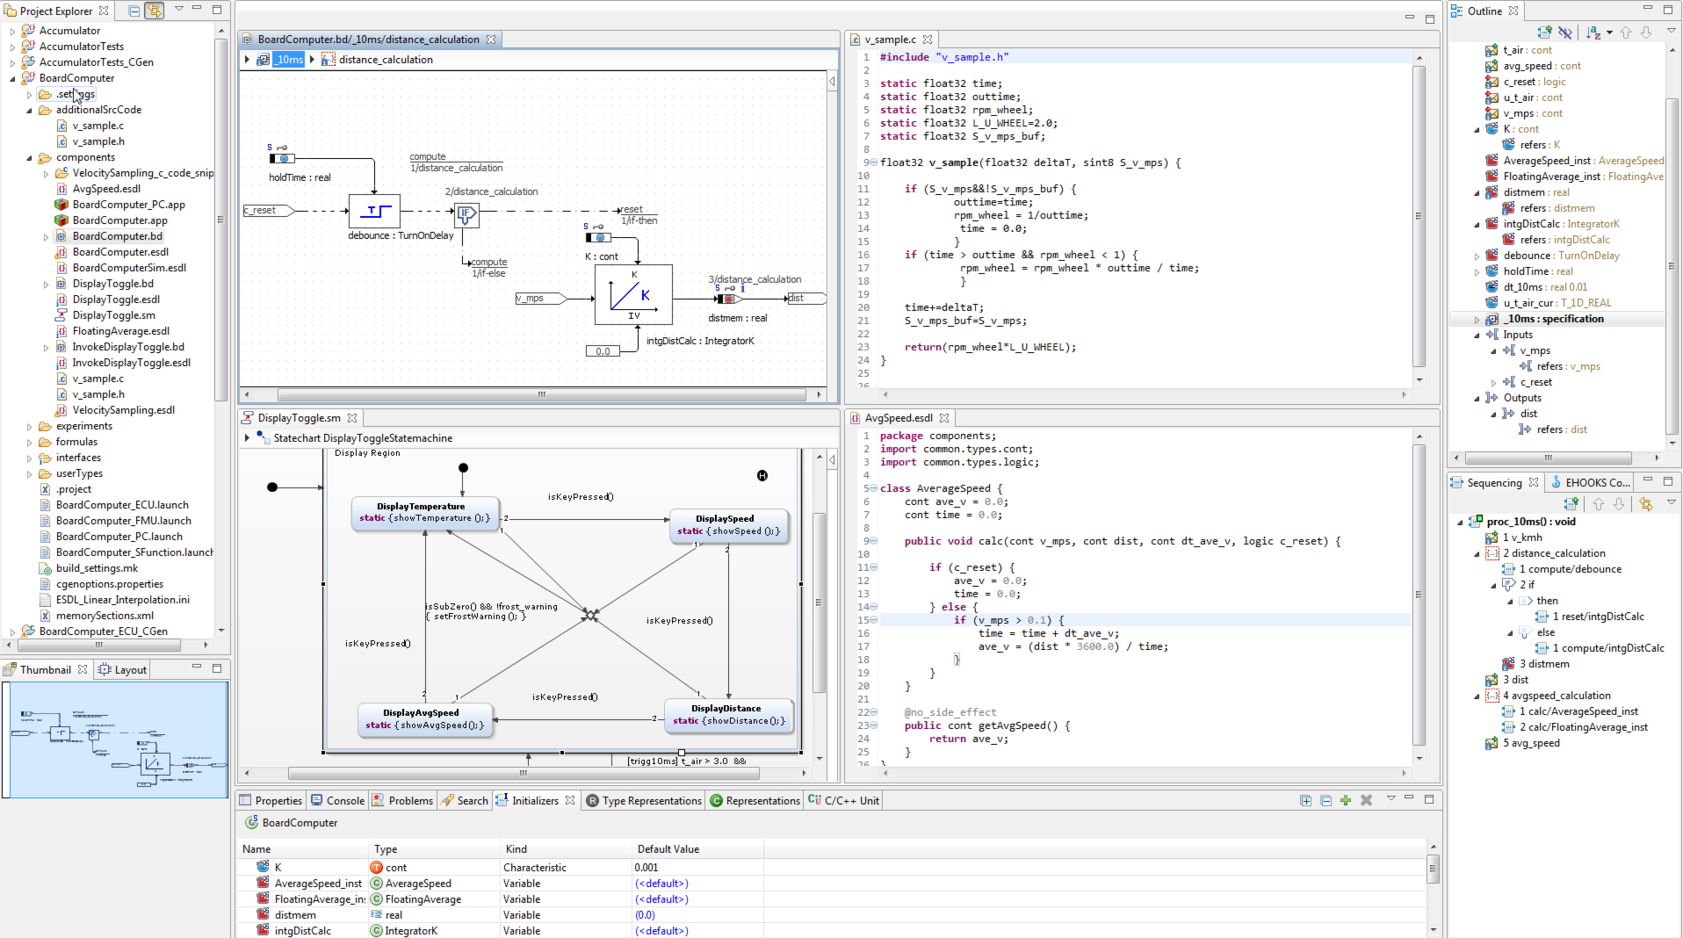 The ASCET-DEVELOPER IDE (Integrated Development Environment) showing graphical and textual models